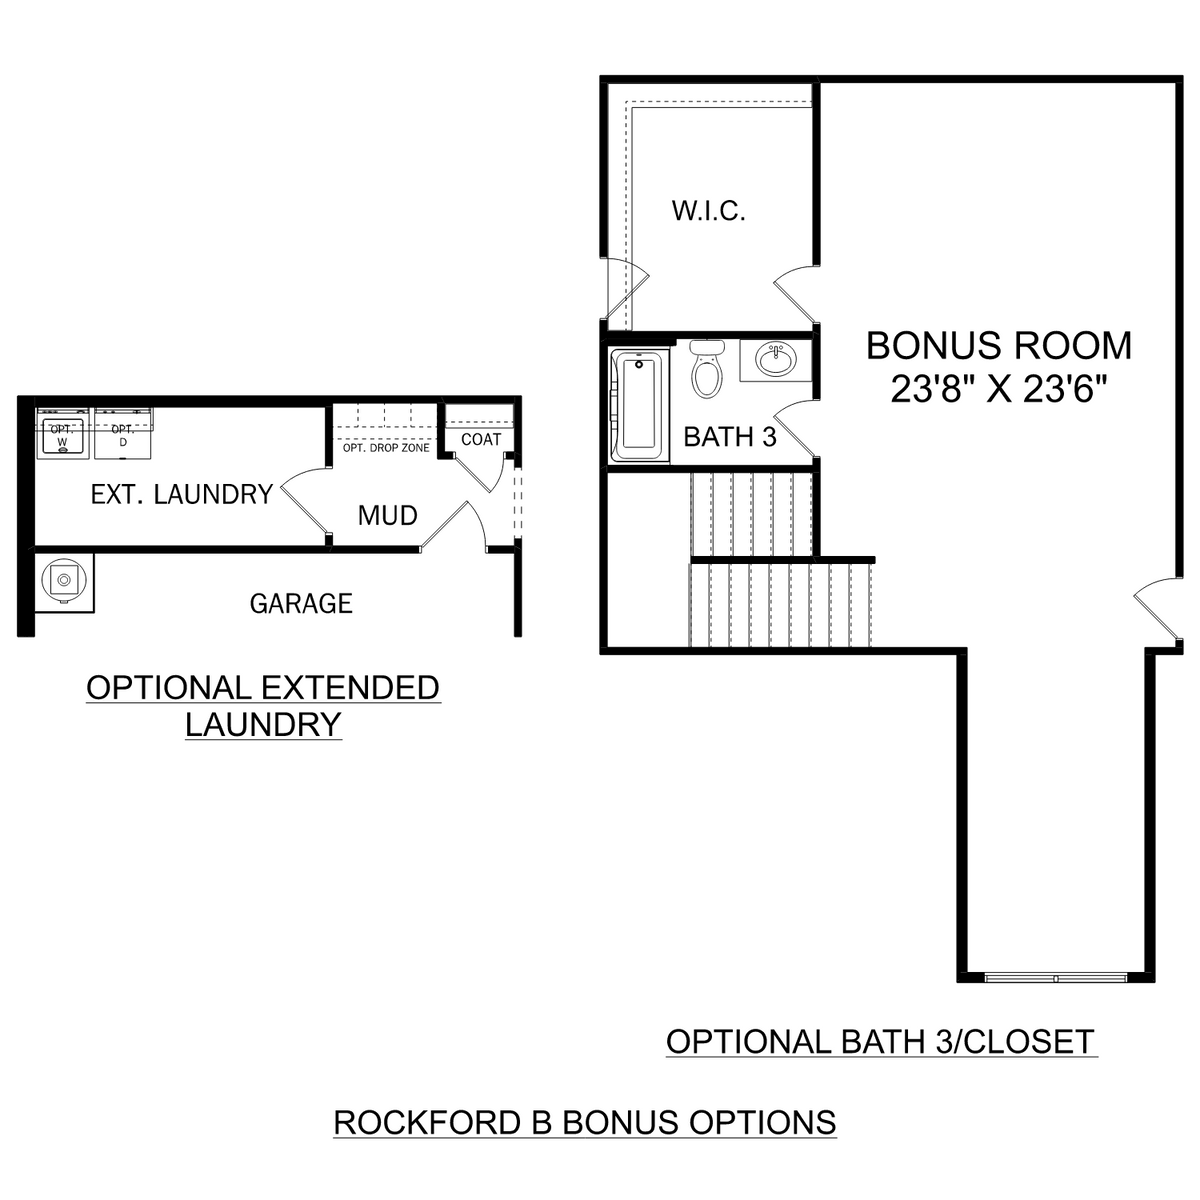 3 - The Rockford B with Bonus buildable floor plan layout in Davidson Homes' Pikes Ridge community.